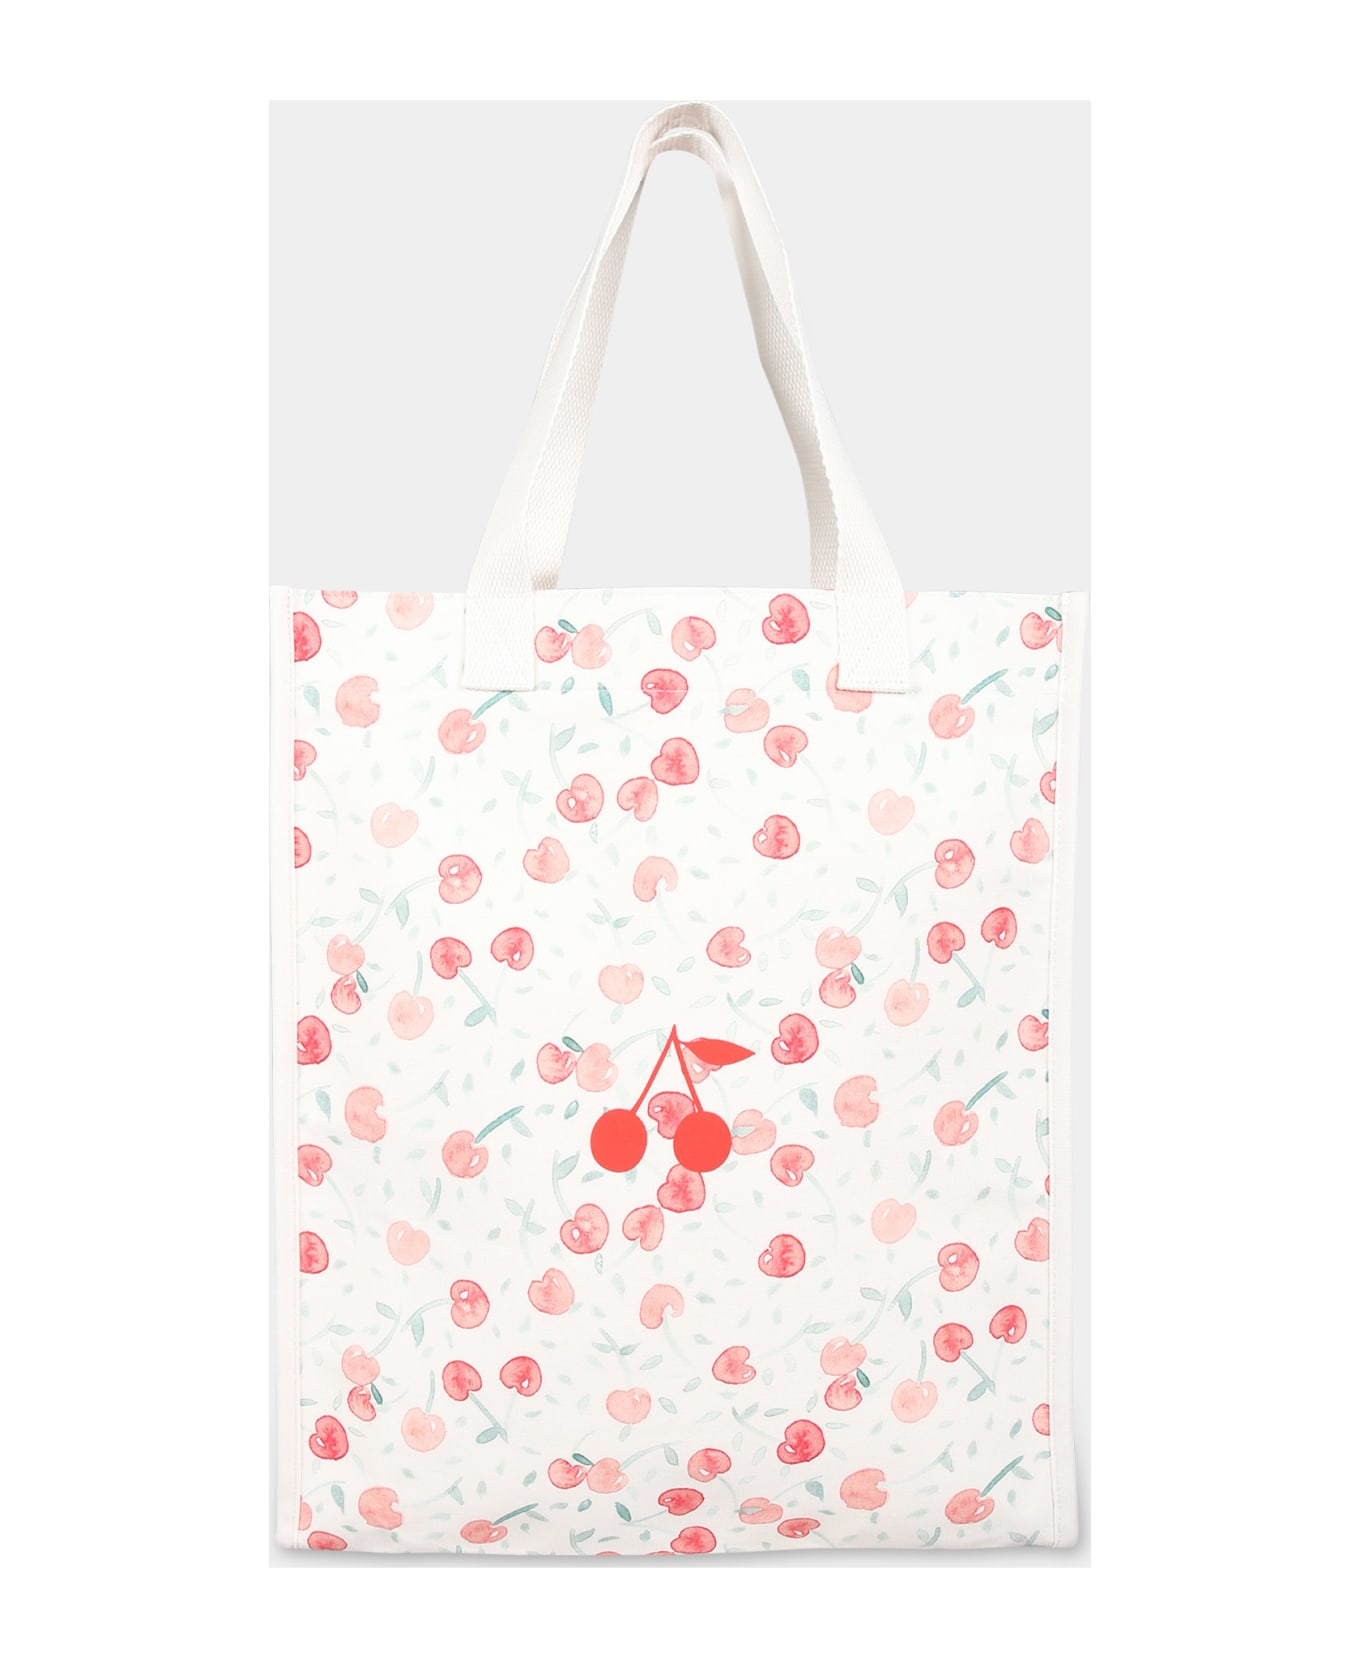 Bonpoint Ivory Bag For Girl With Iconic Cherries - Ivory アクセサリー＆ギフト